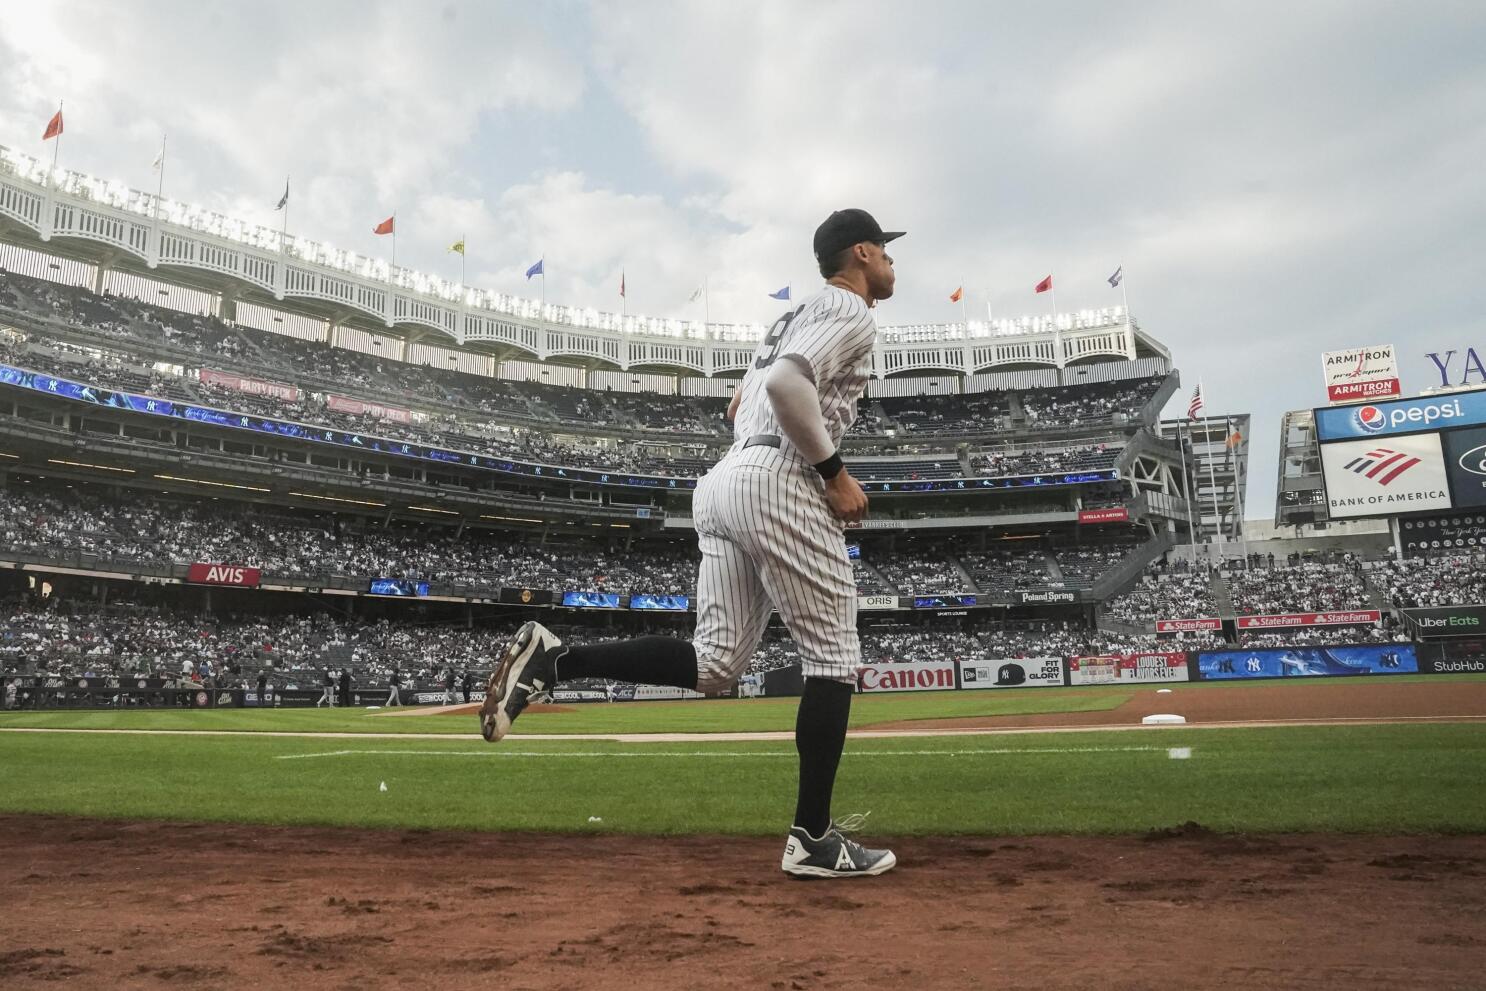 New York Yankees and Aaron Judge reportedly agree on nine-year